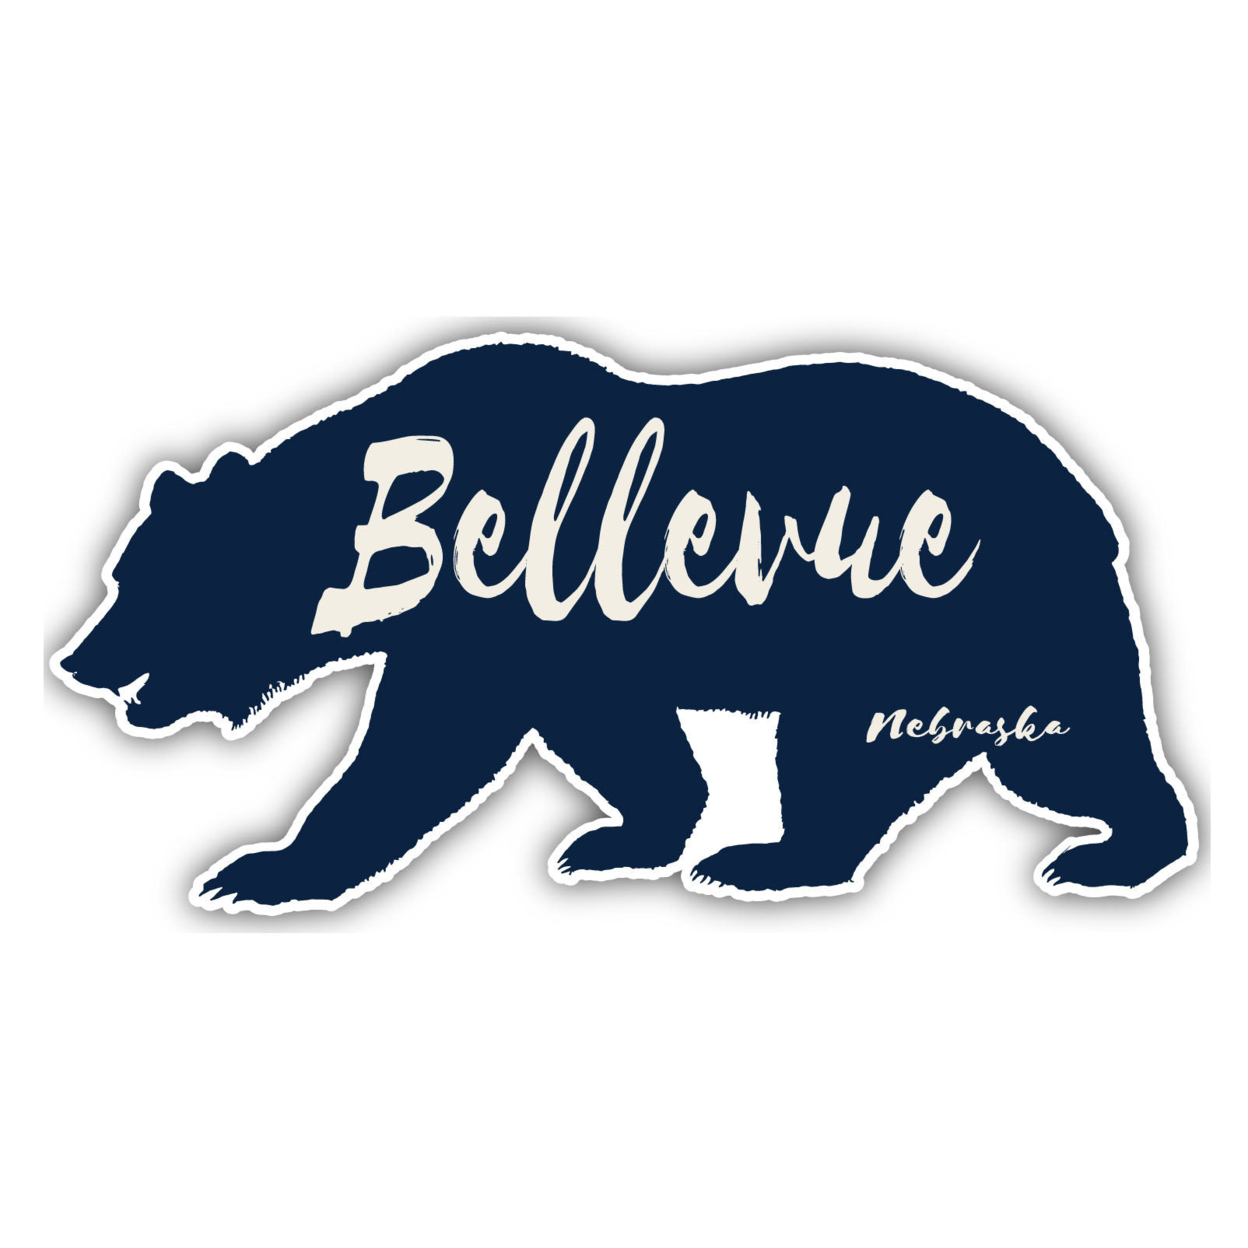 Bellevue Nebraska Souvenir Decorative Stickers (Choose Theme And Size) - 4-Pack, 6-Inch, Great Outdoors